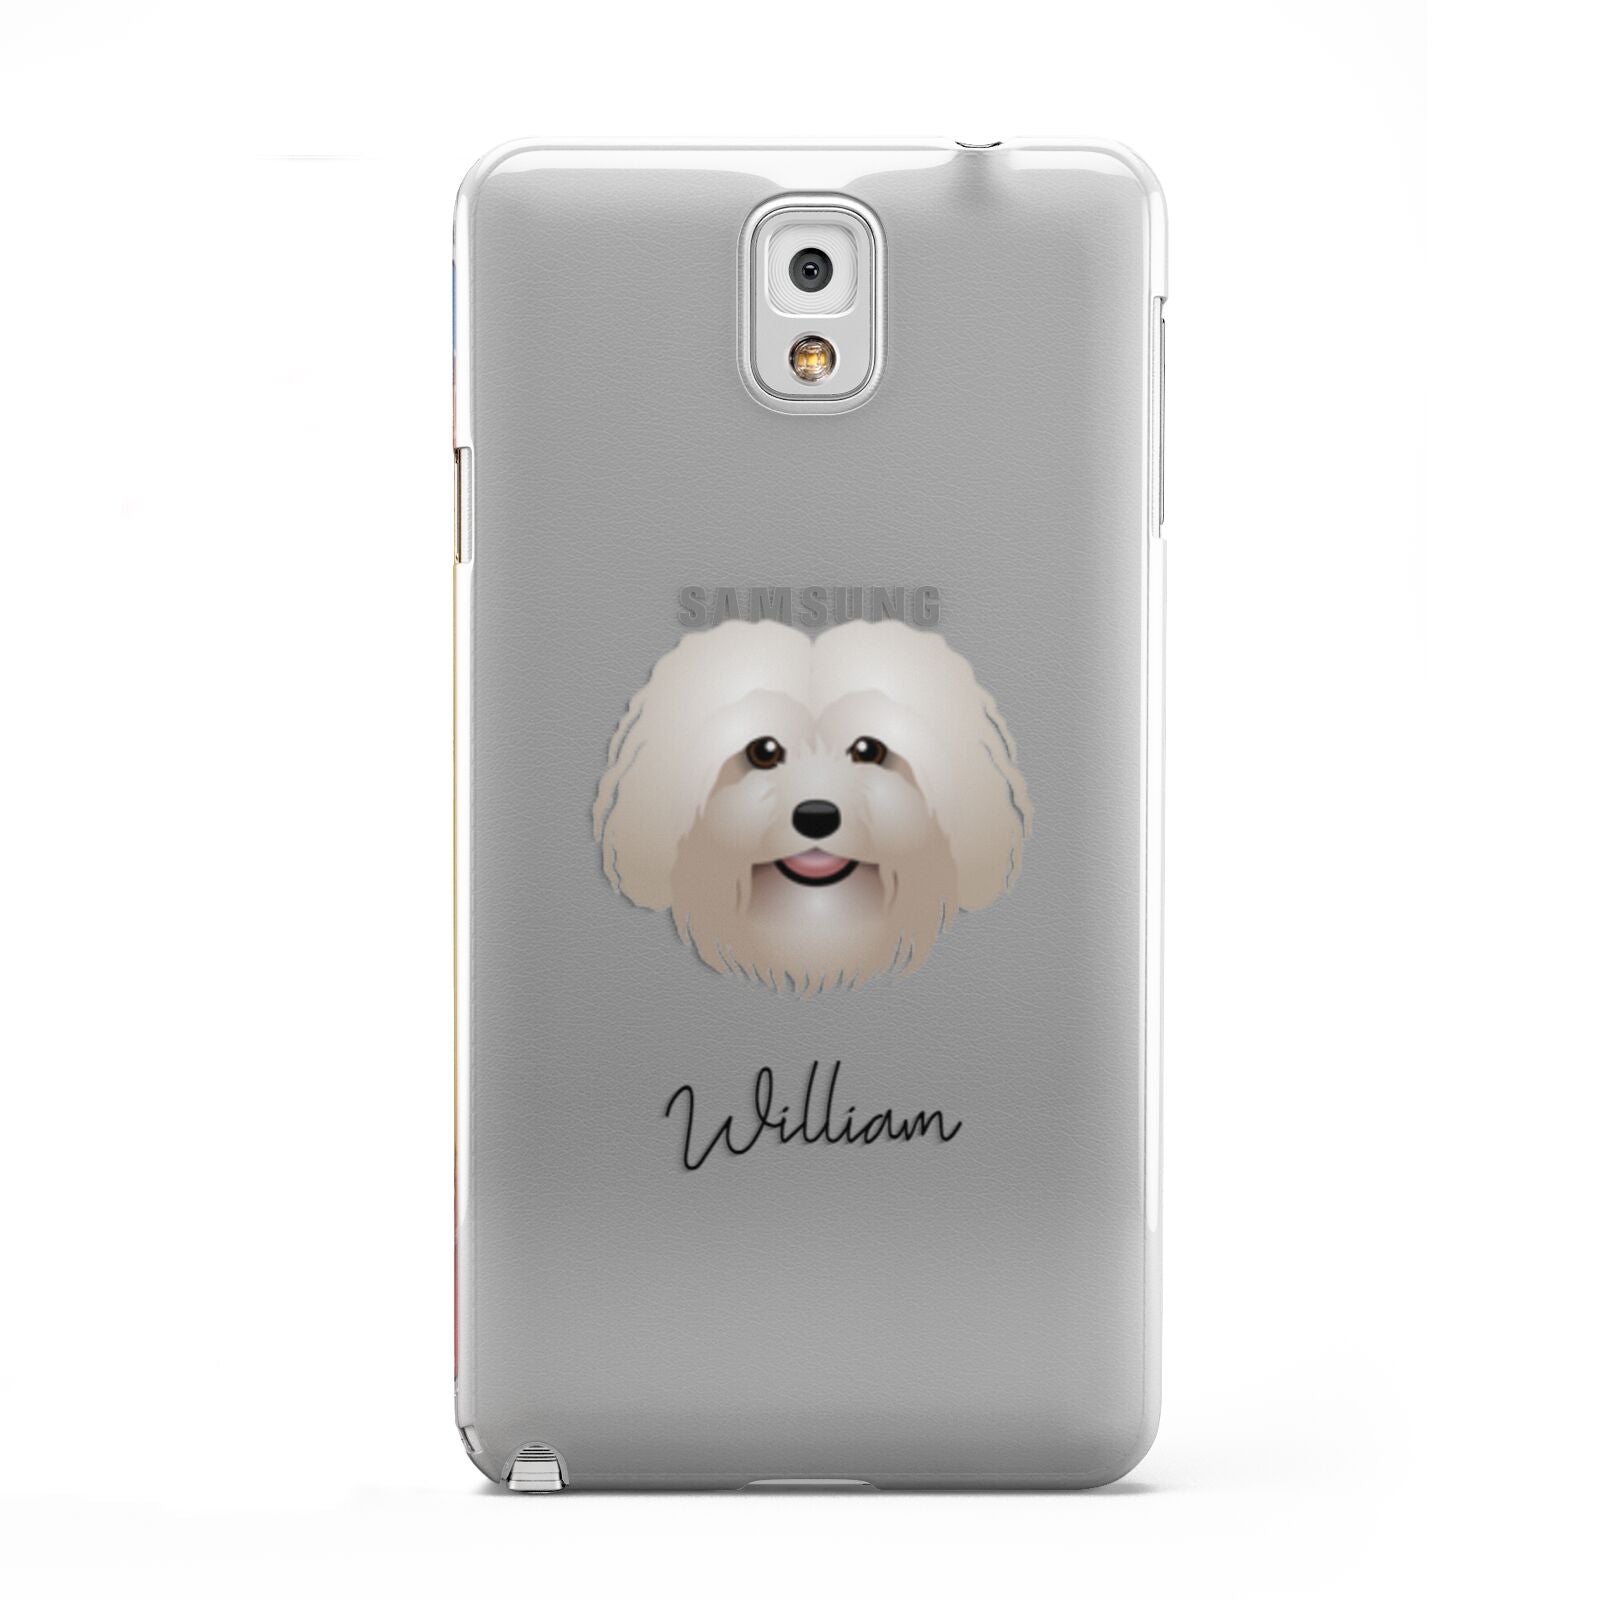 Bolognese Personalised Samsung Galaxy Note 3 Case